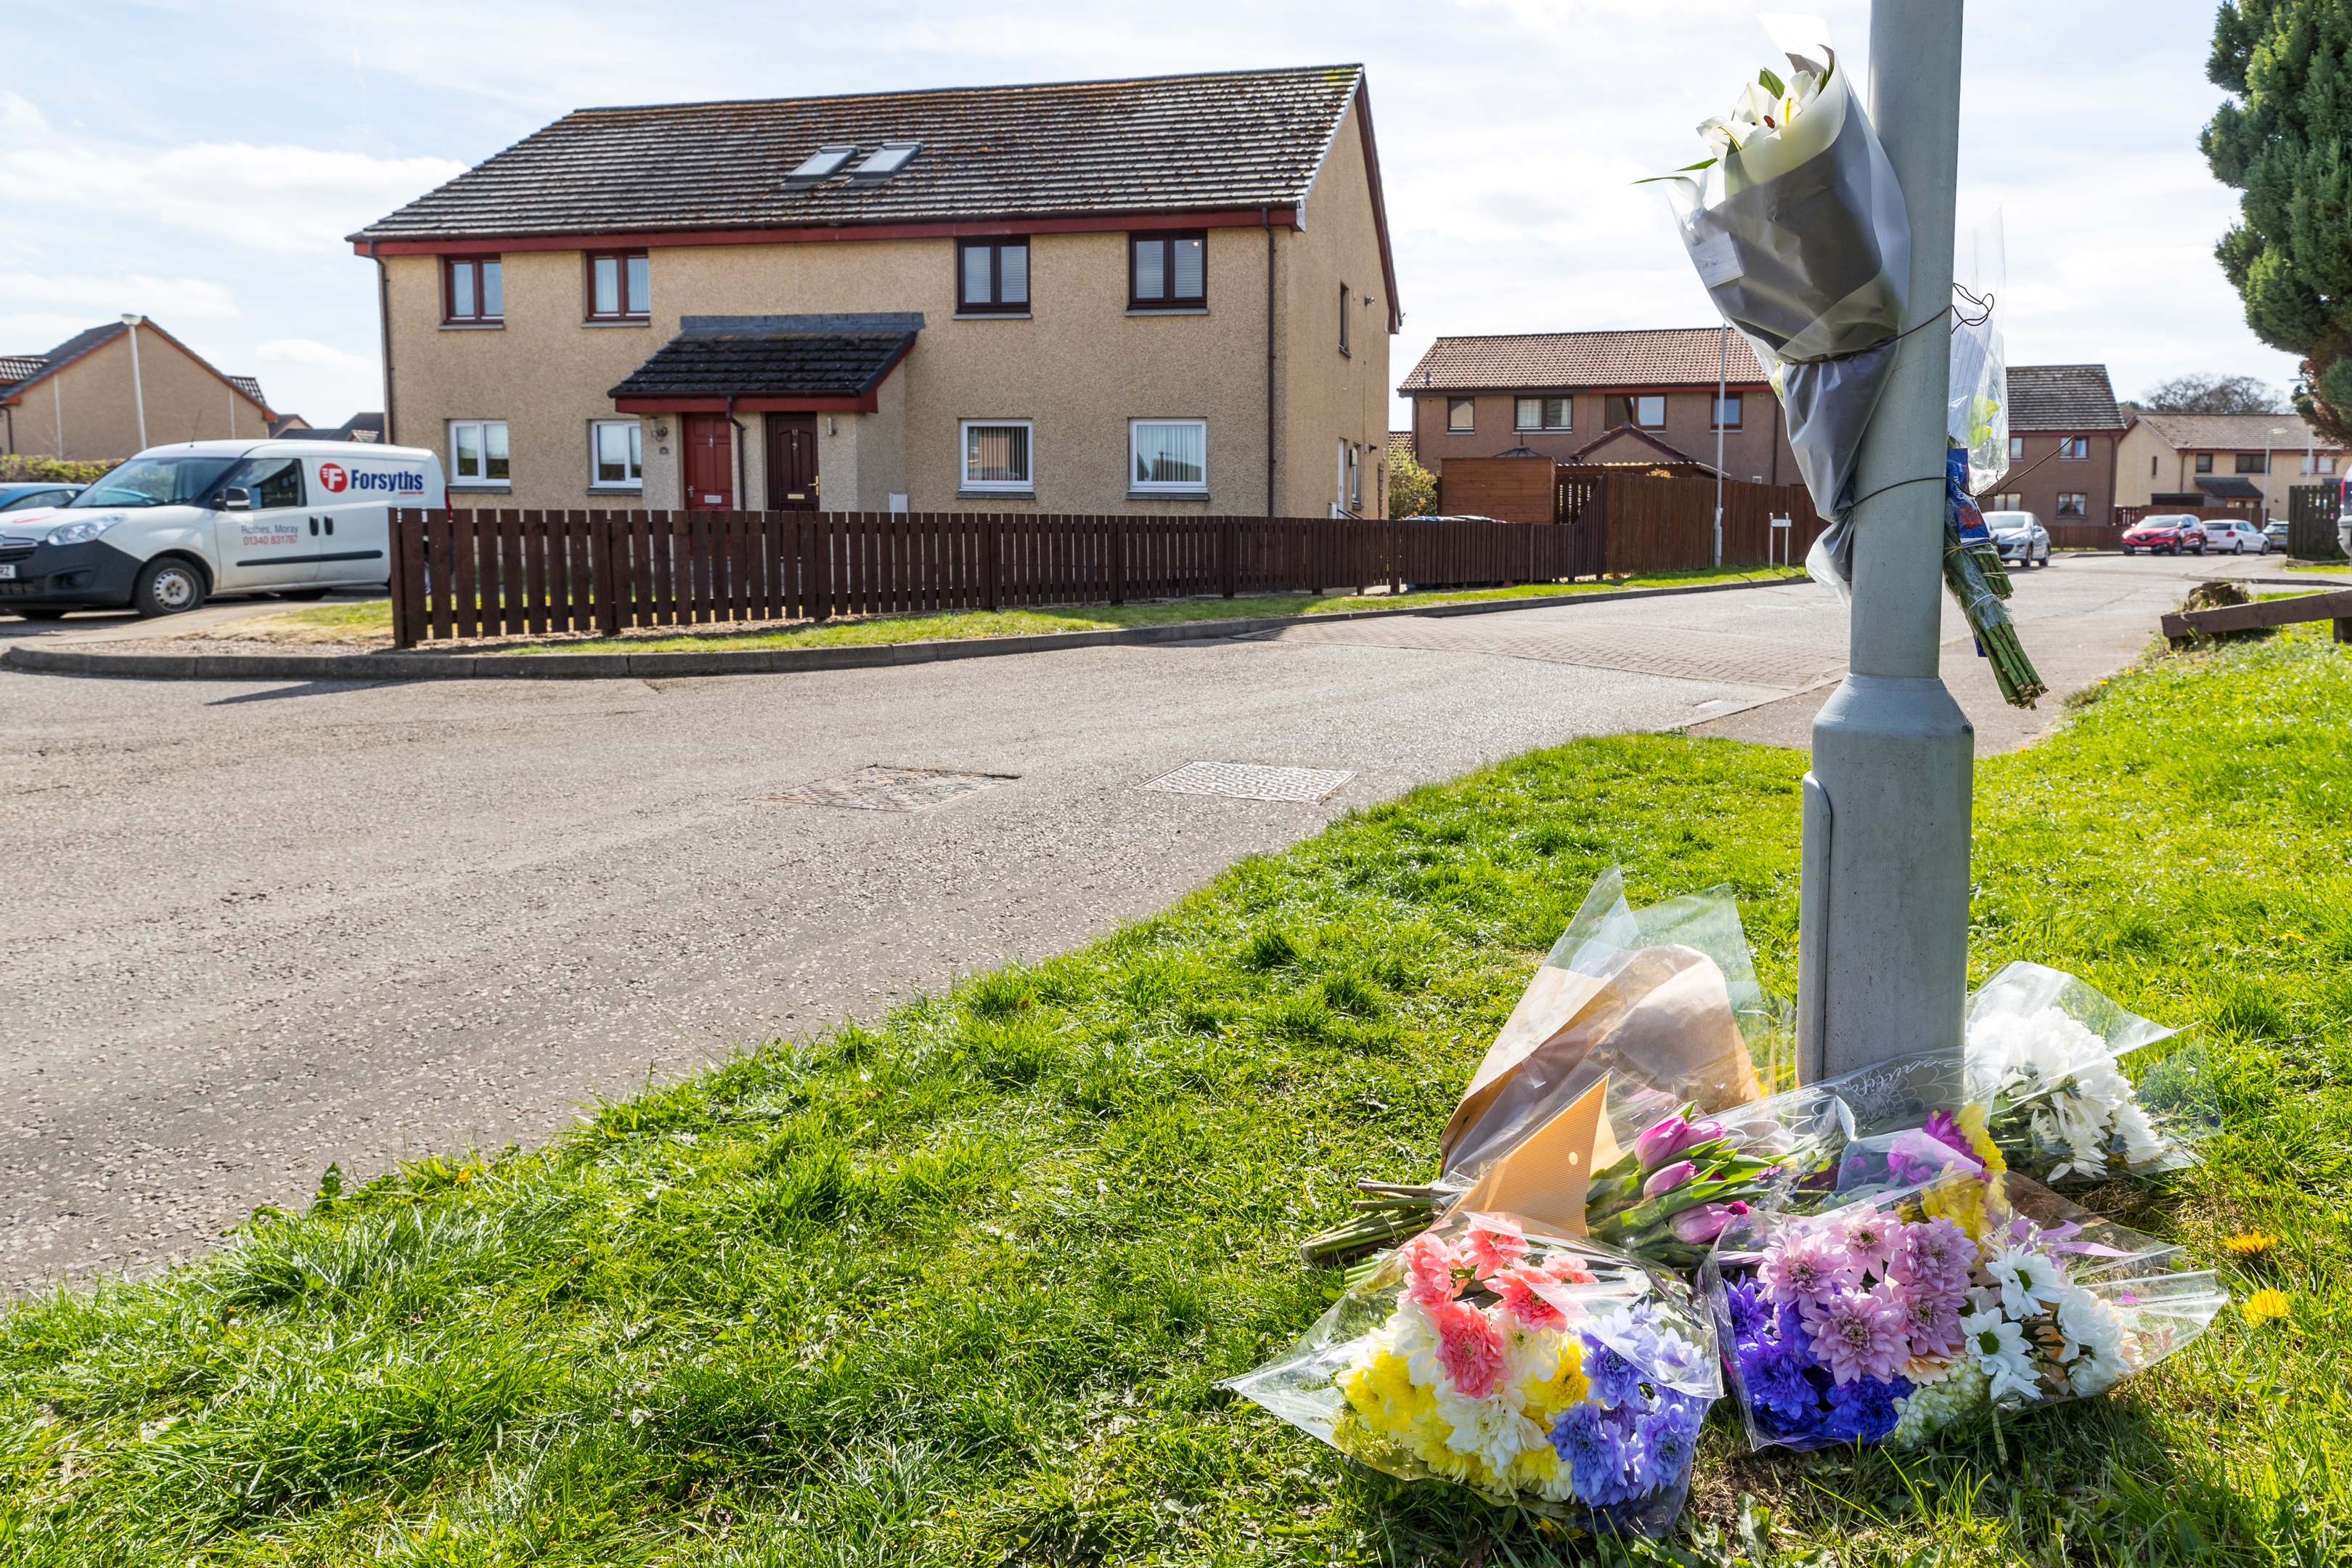 Floral tributes to the boy that died.